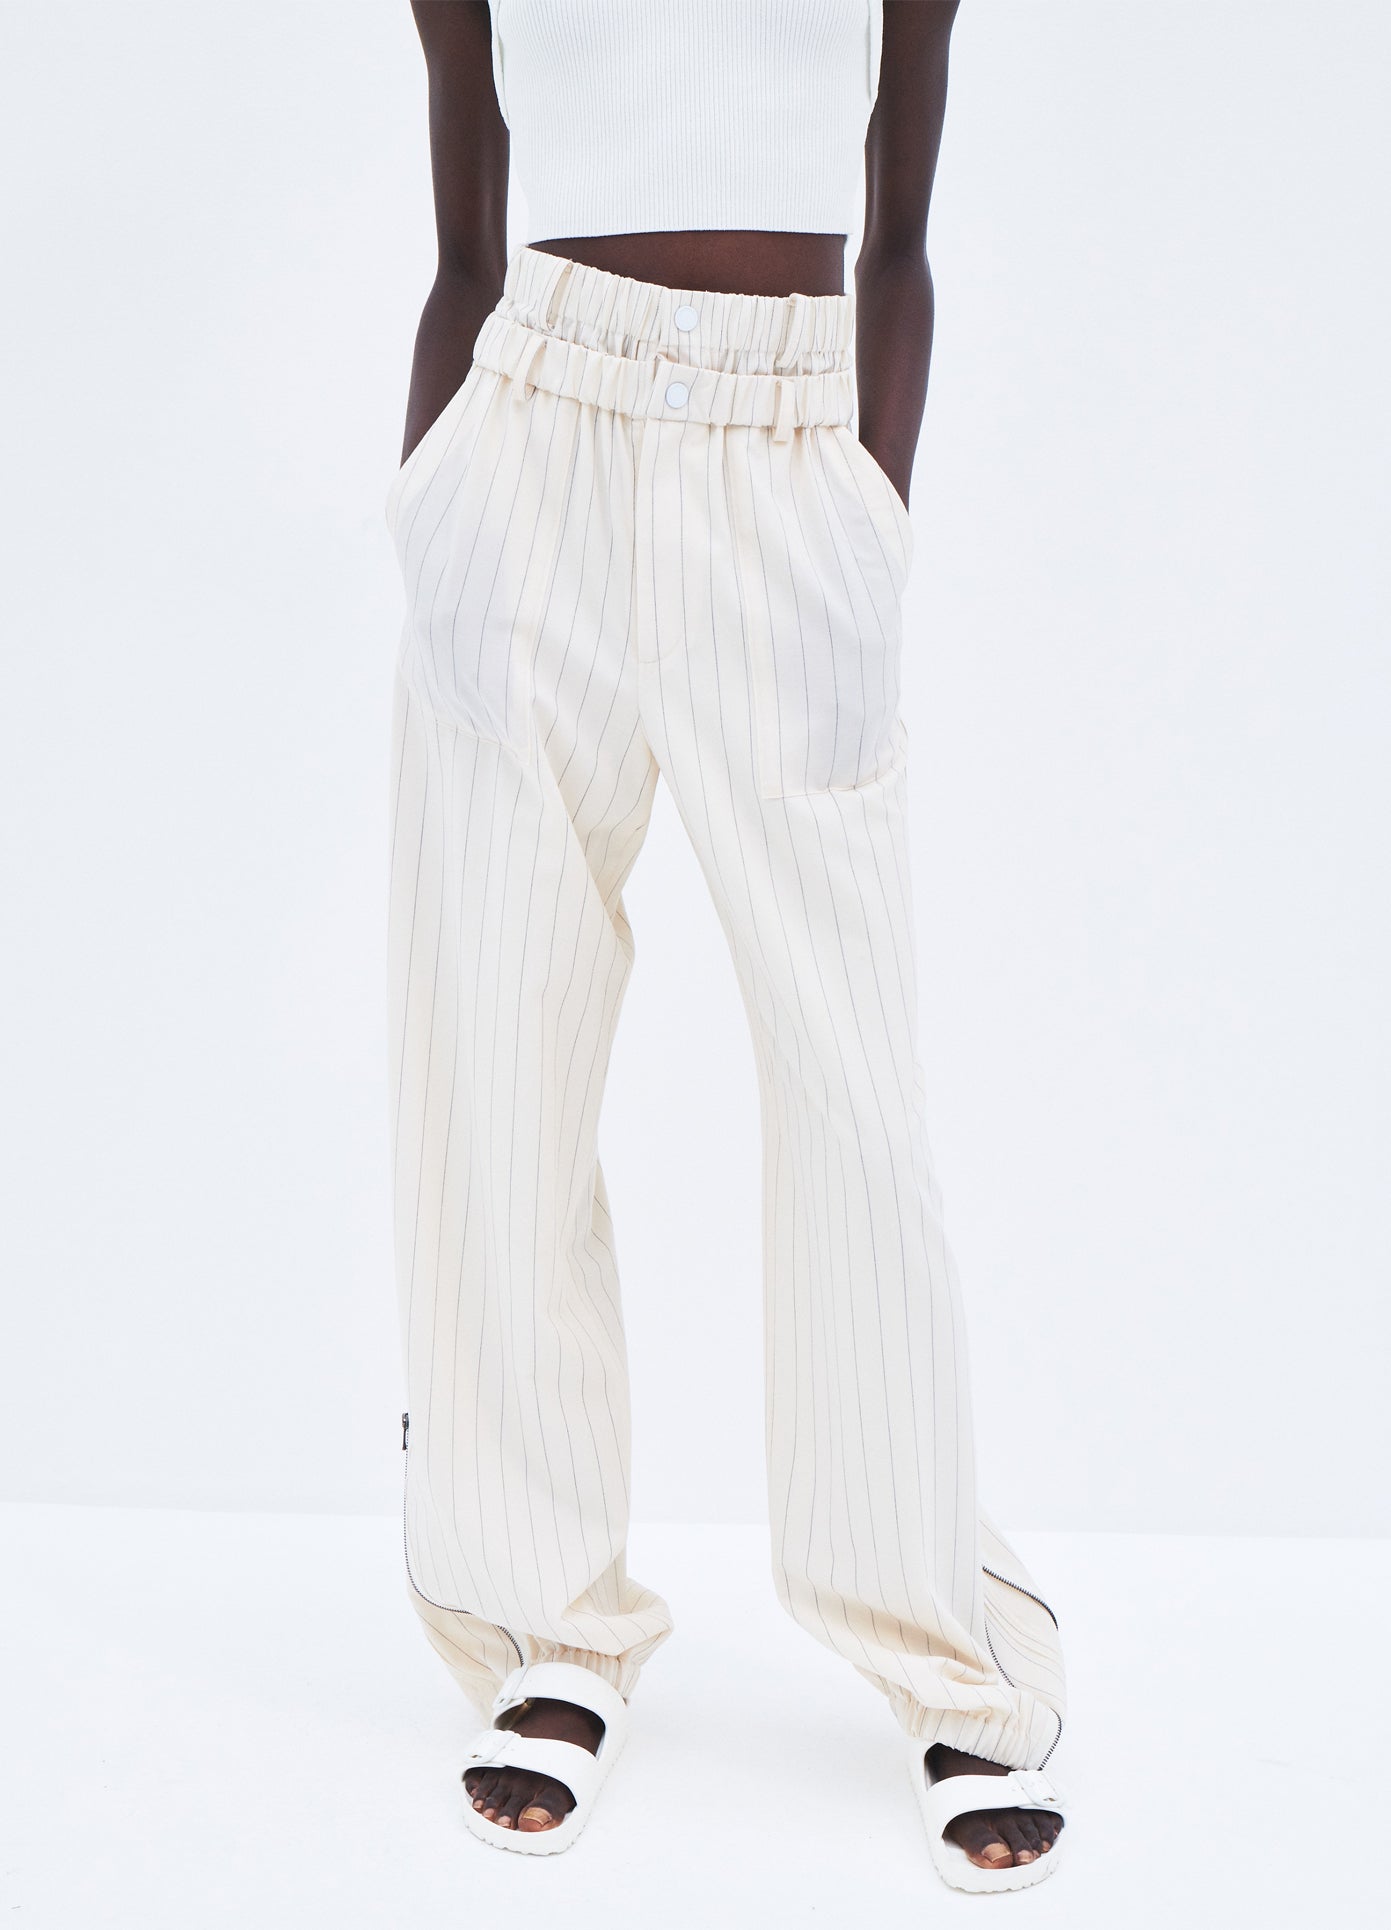 MONSE Pinstripe Double Waistband Zip Detail Pant in Ivory Pinstripe on model front detail view